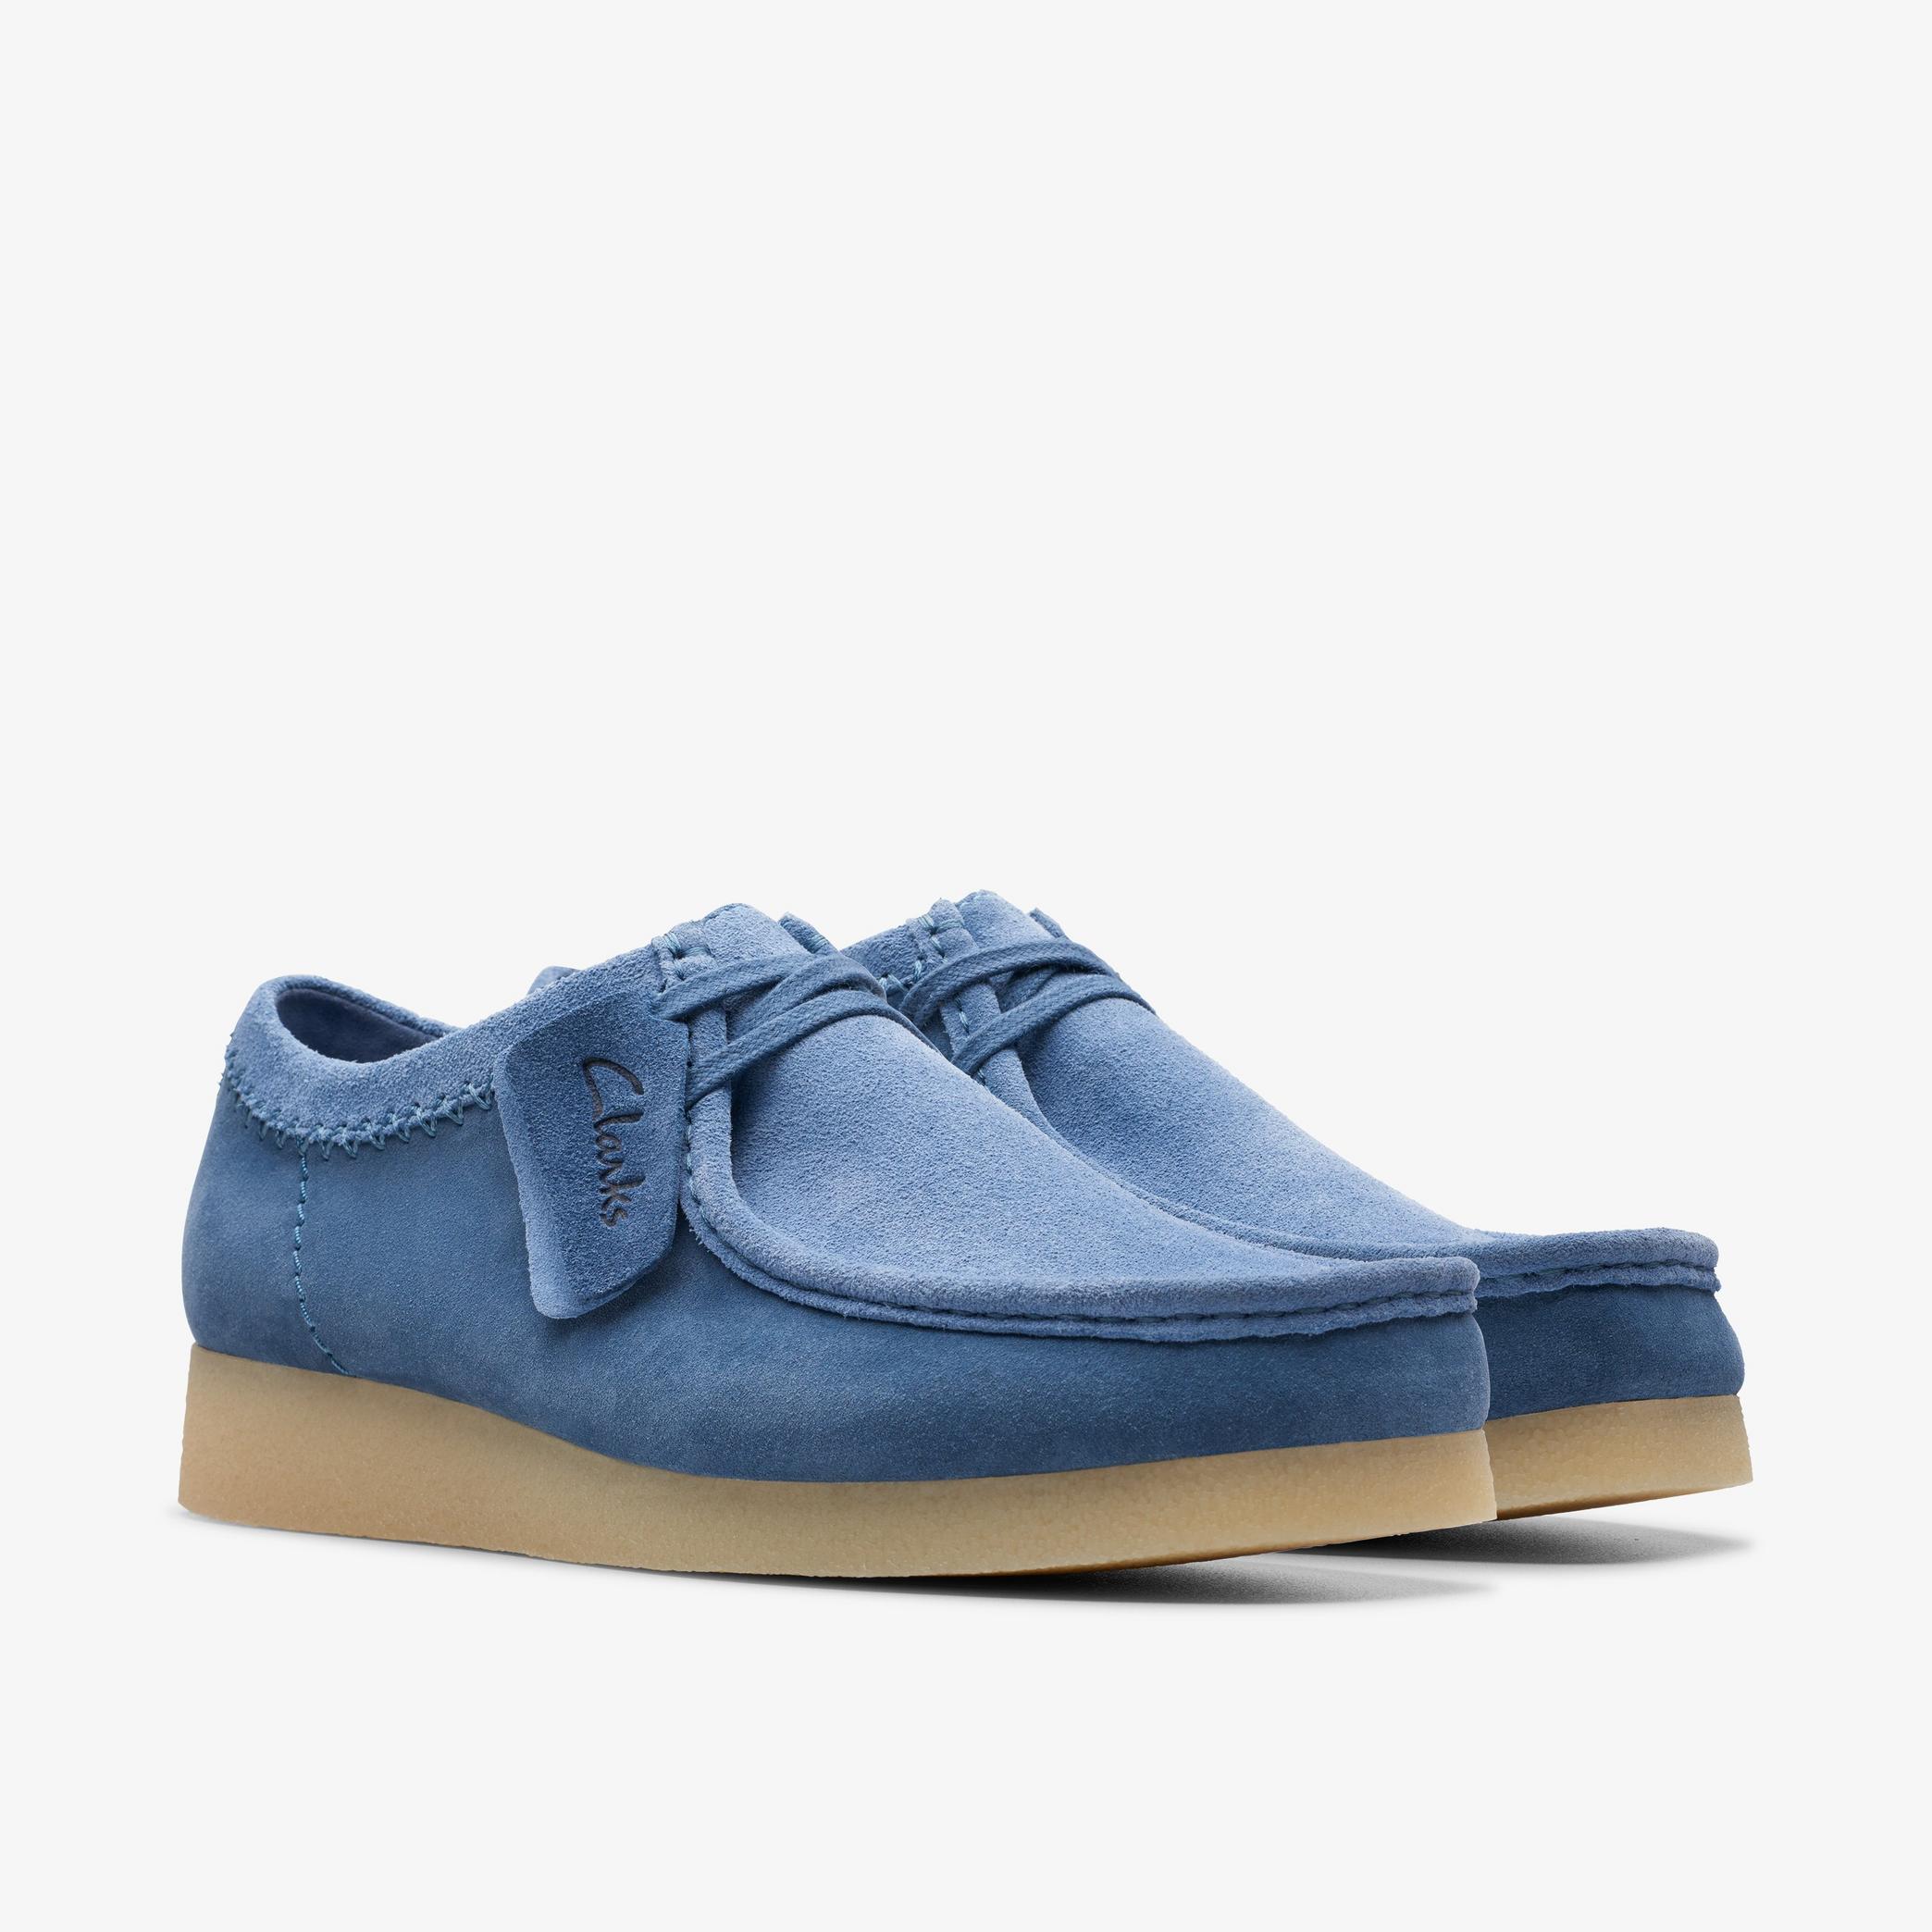 Wallabee EVO Blue Suede Moccasins, view 4 of 6